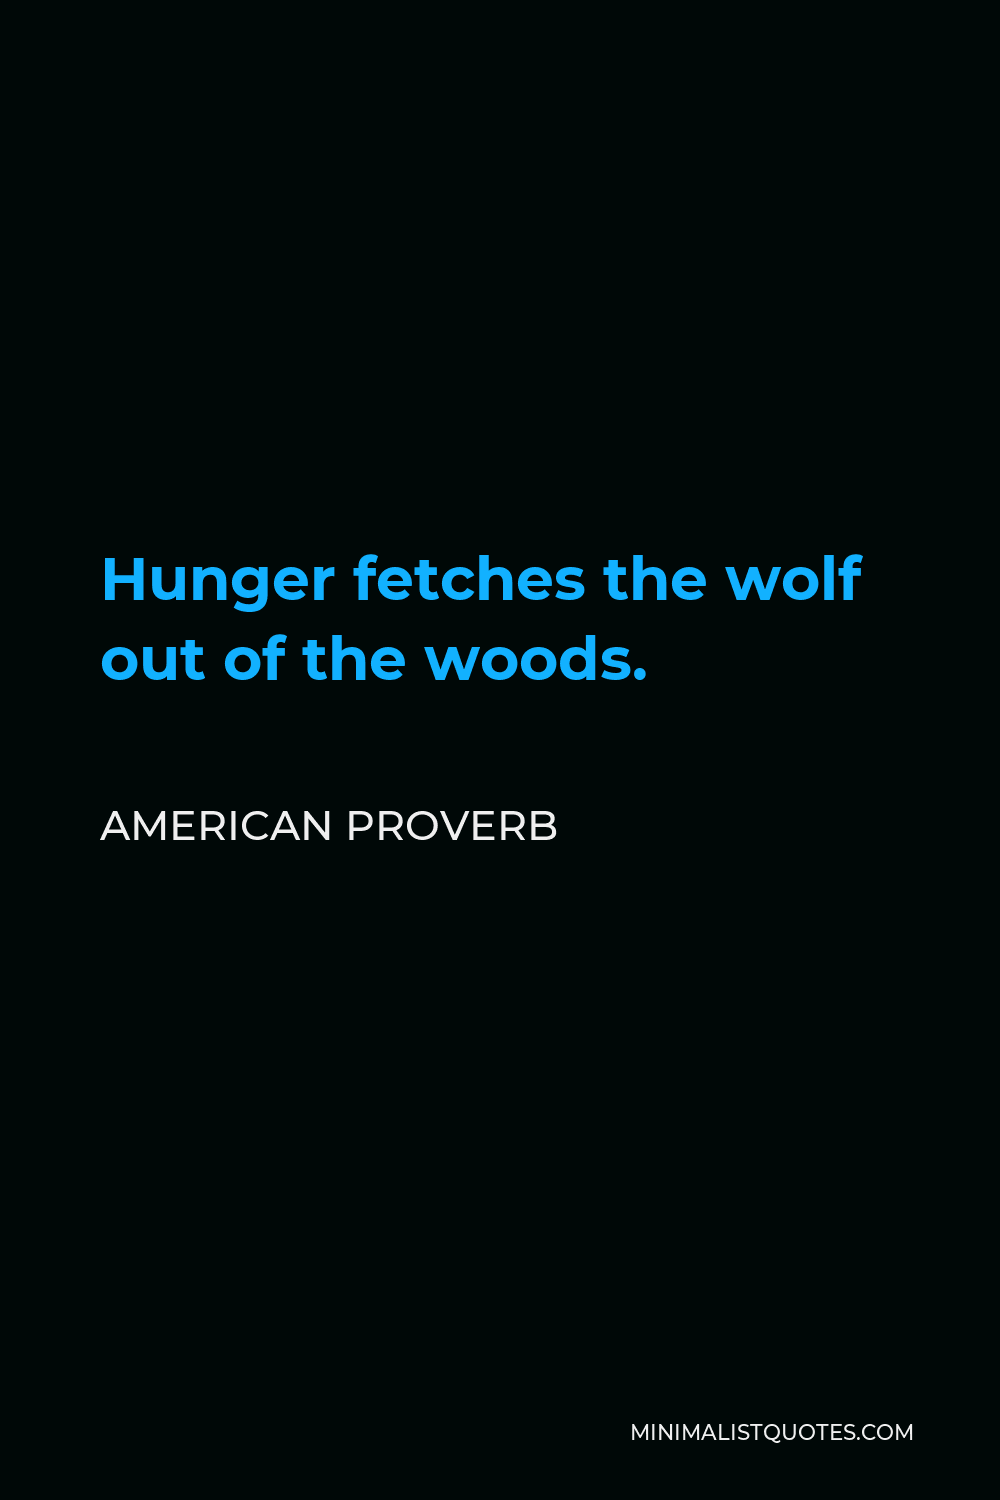 American Proverb Quote - Hunger fetches the wolf out of the woods.